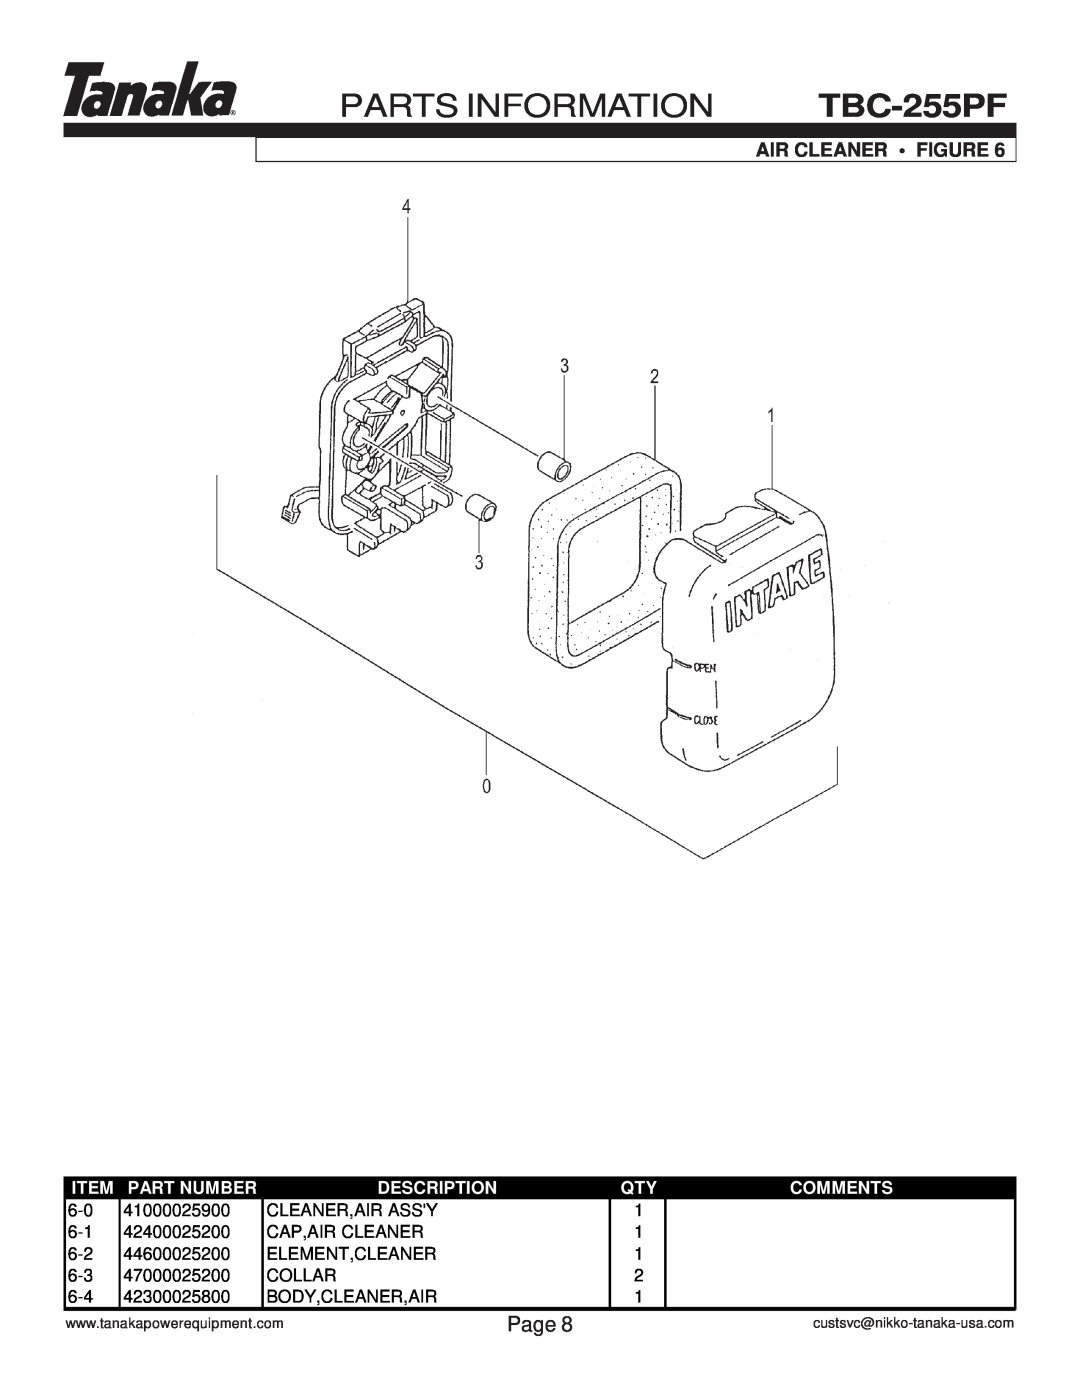 Tanaka TBC-255PF manual Air Cleaner Figure, Parts Information, Page, Part Number, Description, Comments 